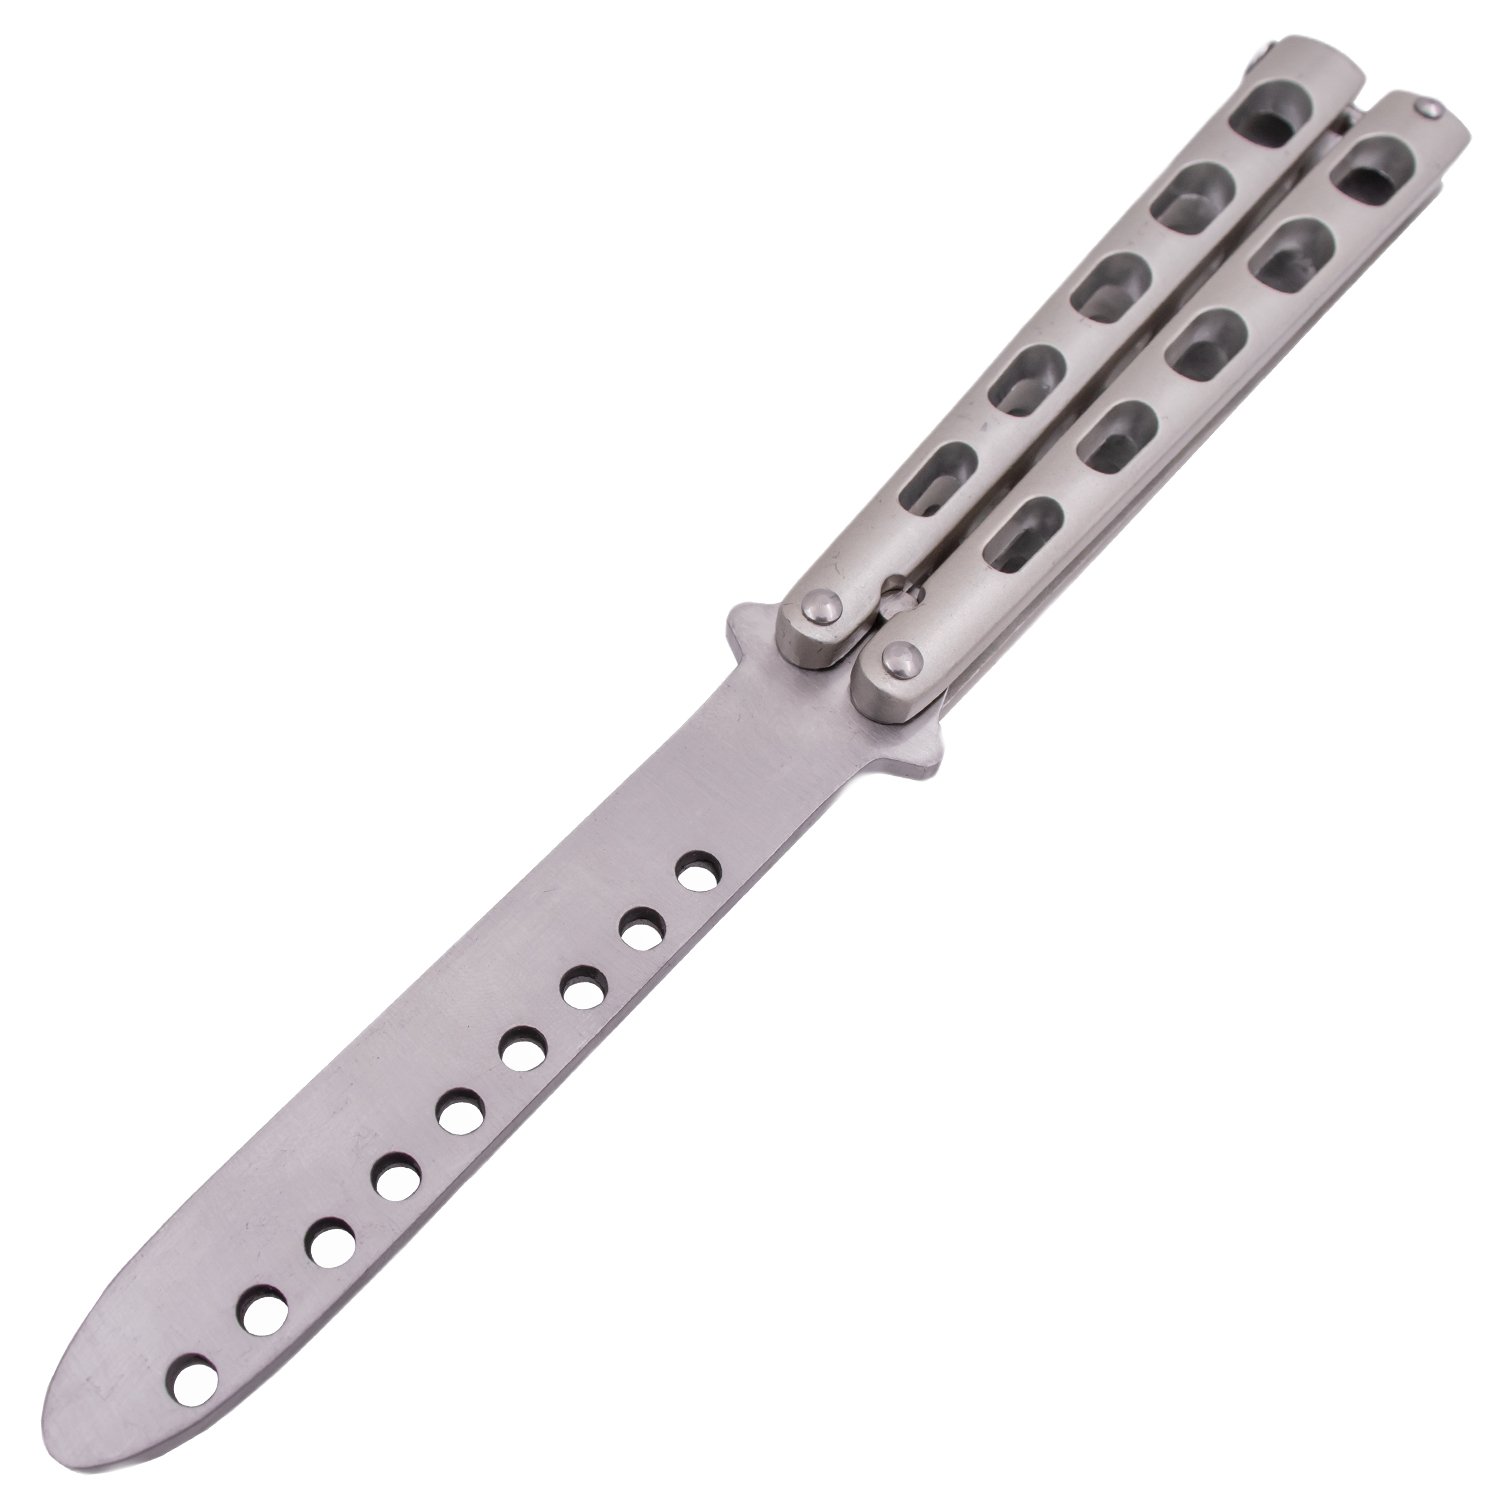 Tiger USA Butterfly Training Knife 440 Stainless 8.85 Inch   Silver Picture 1